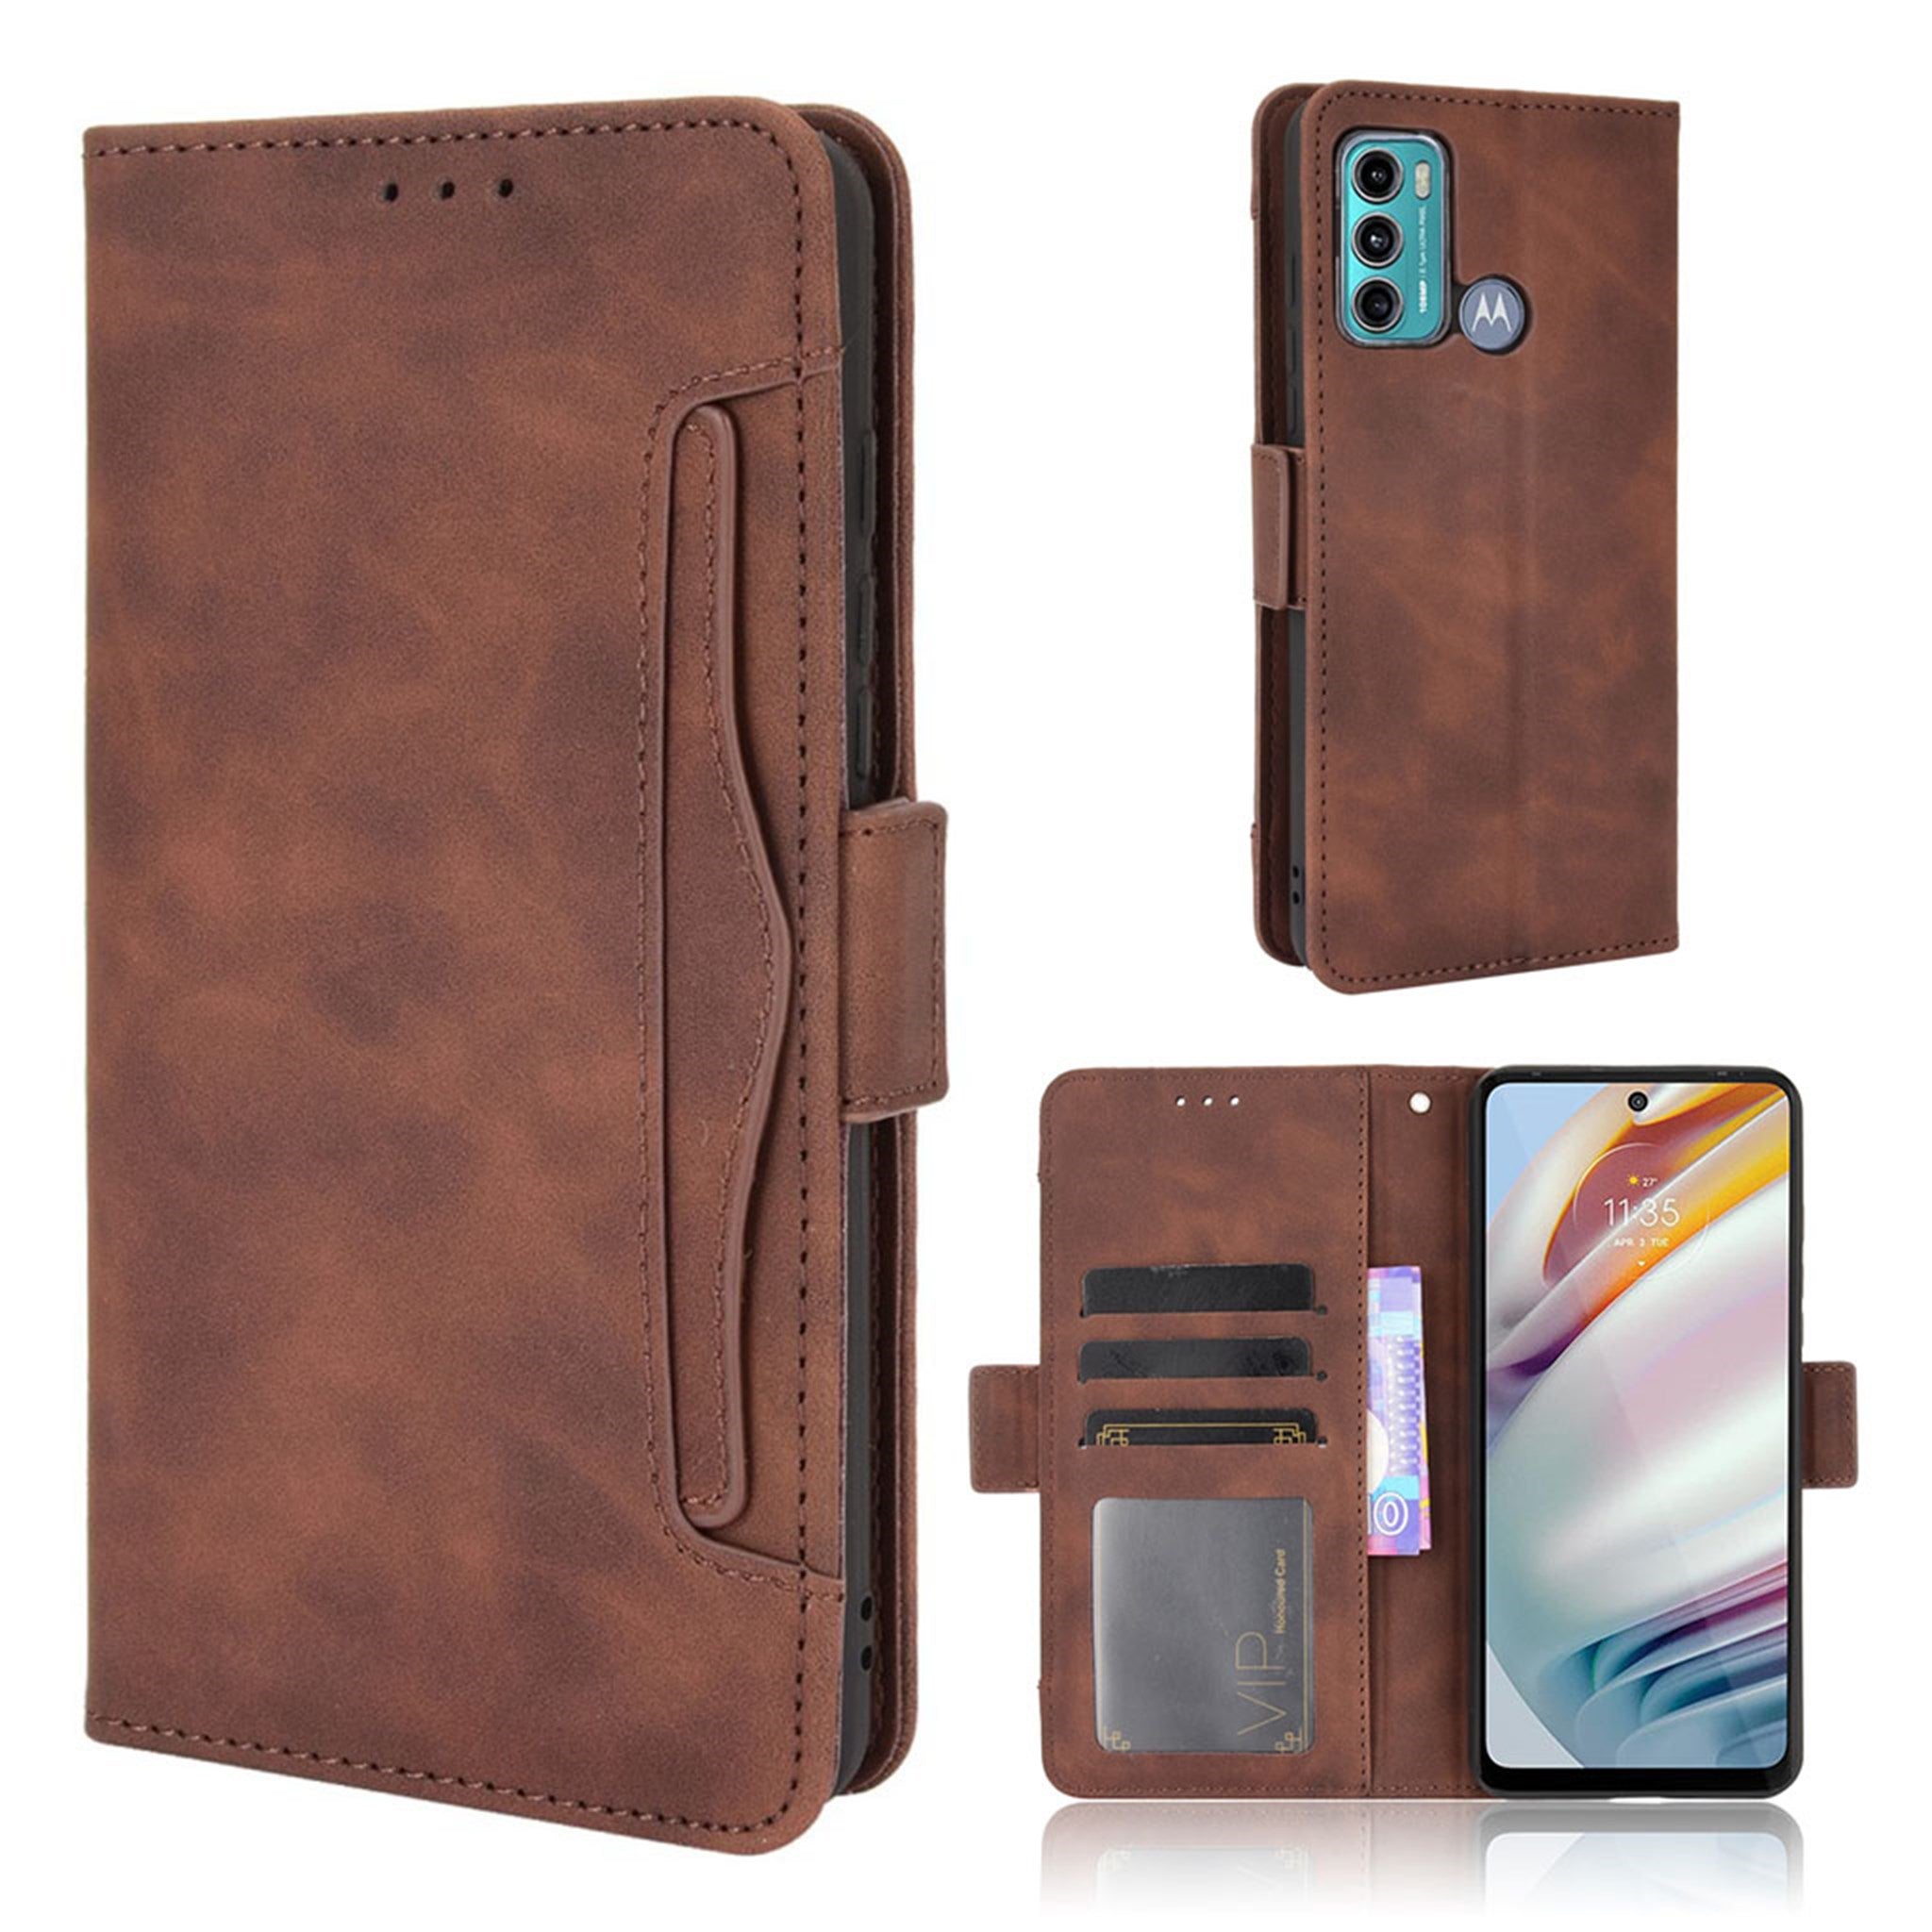 Modern-styled leather wallet case for Motorola Moto G40 Fusion / G60 - Brown